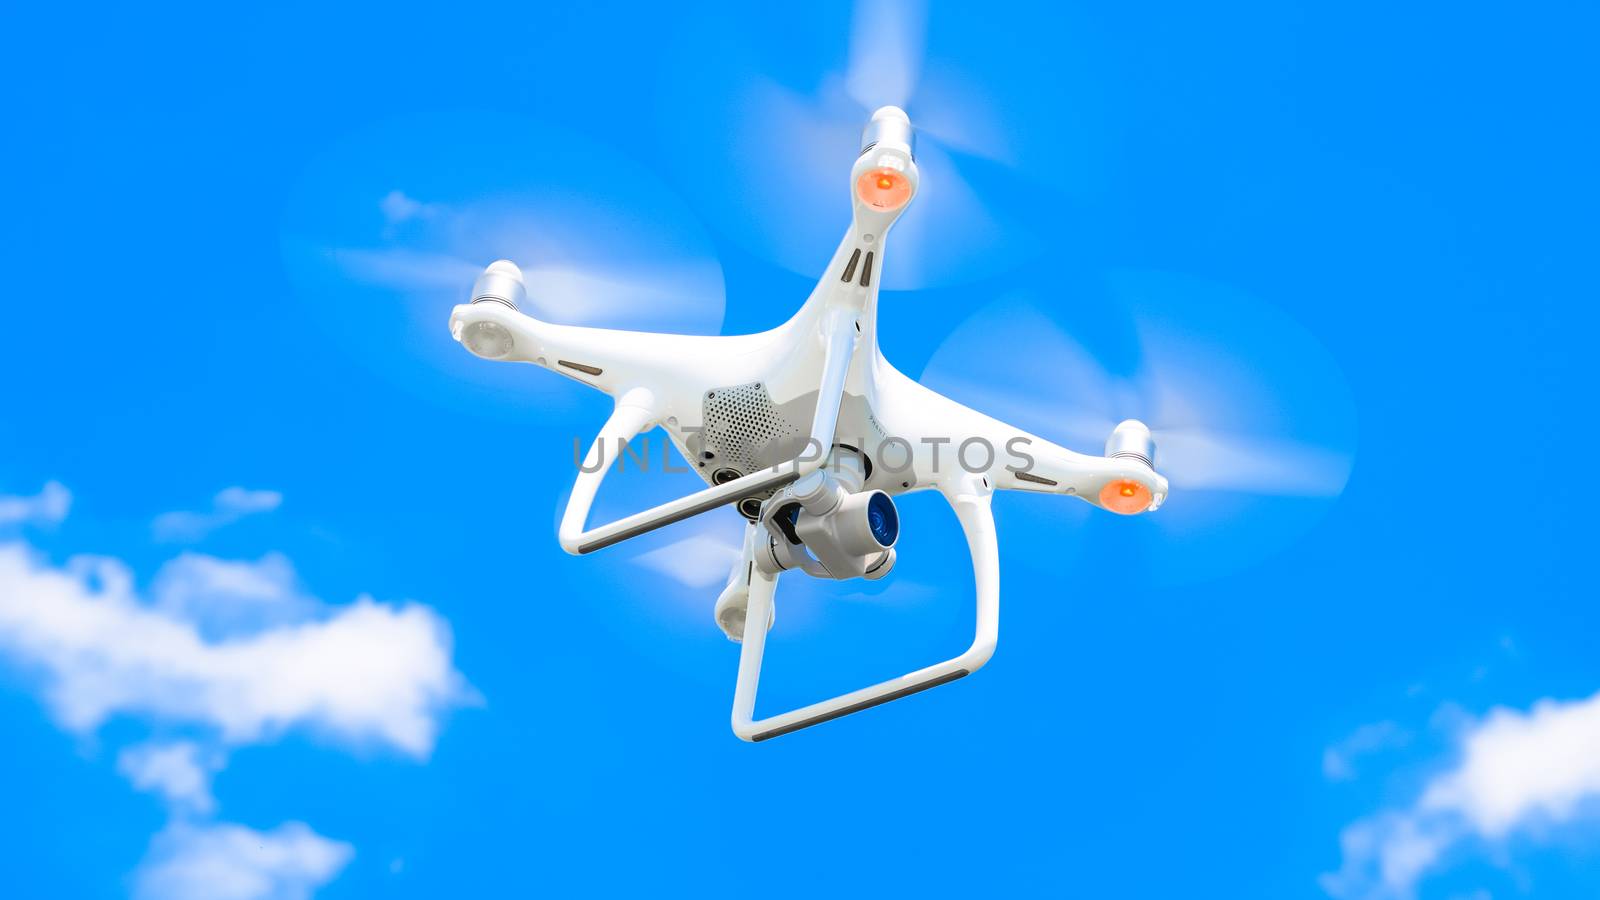 Drone DJI Phantom 4 in flight. Quadrocopter against the blue sky with white clouds. The flight of the copter in the sky.